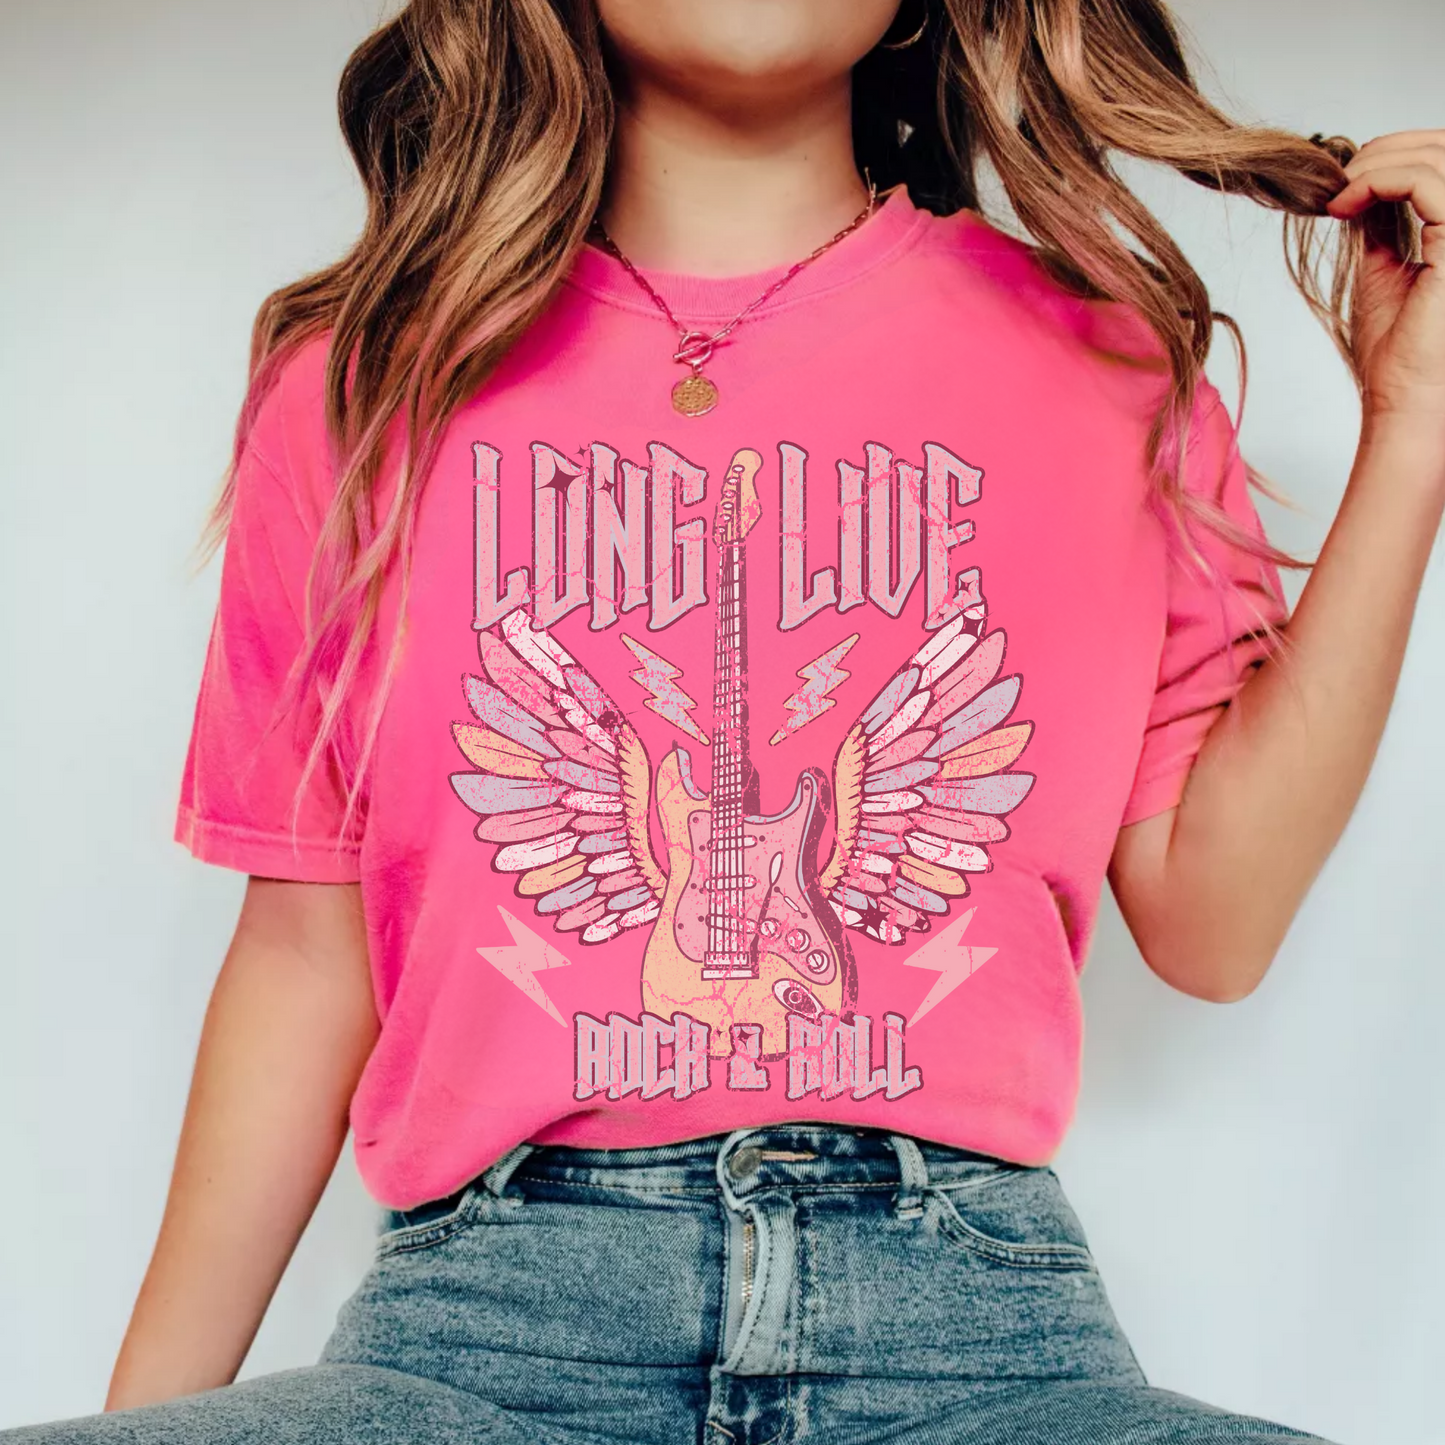 (shirt not included) Long Live Rock and Roll  - Clear Film Transfer